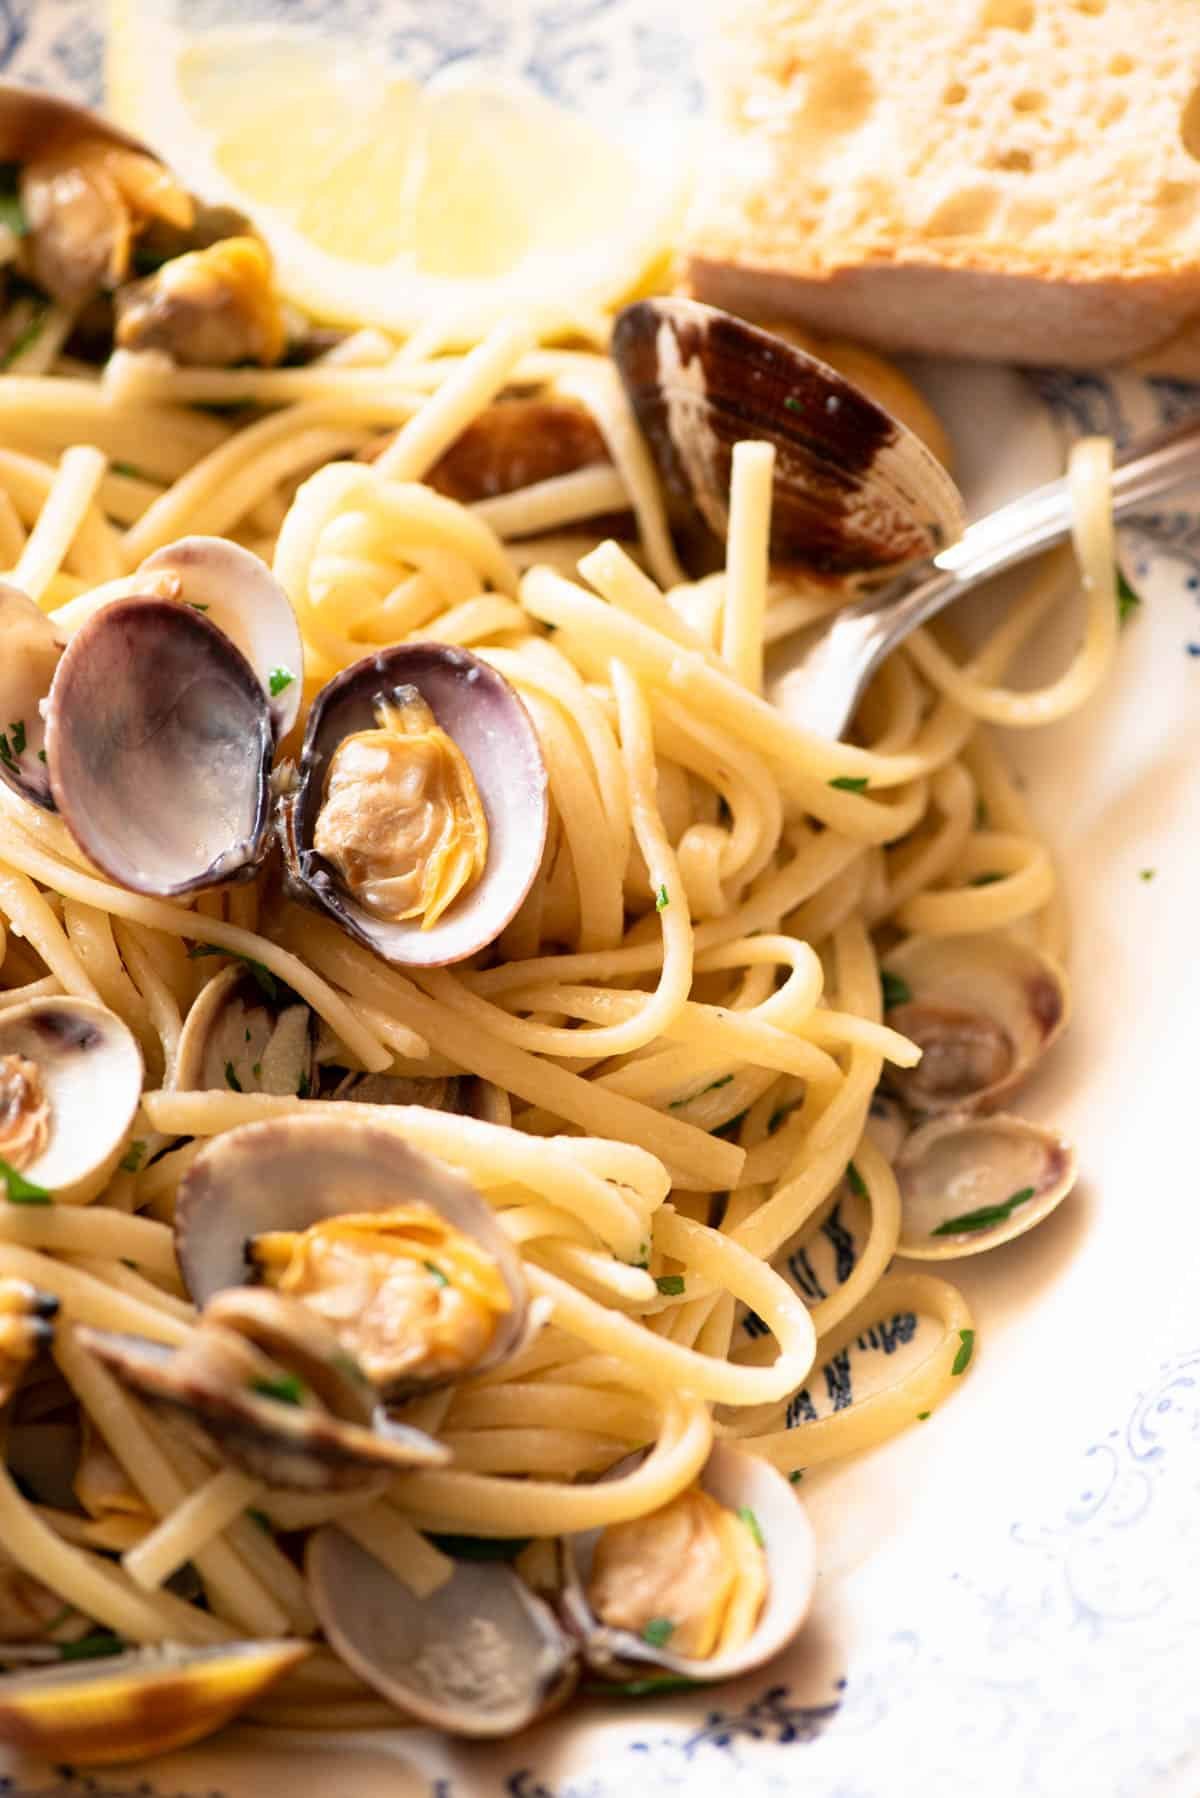 A close up of linguine pasta with clams, parsley and lemon in a bowl.